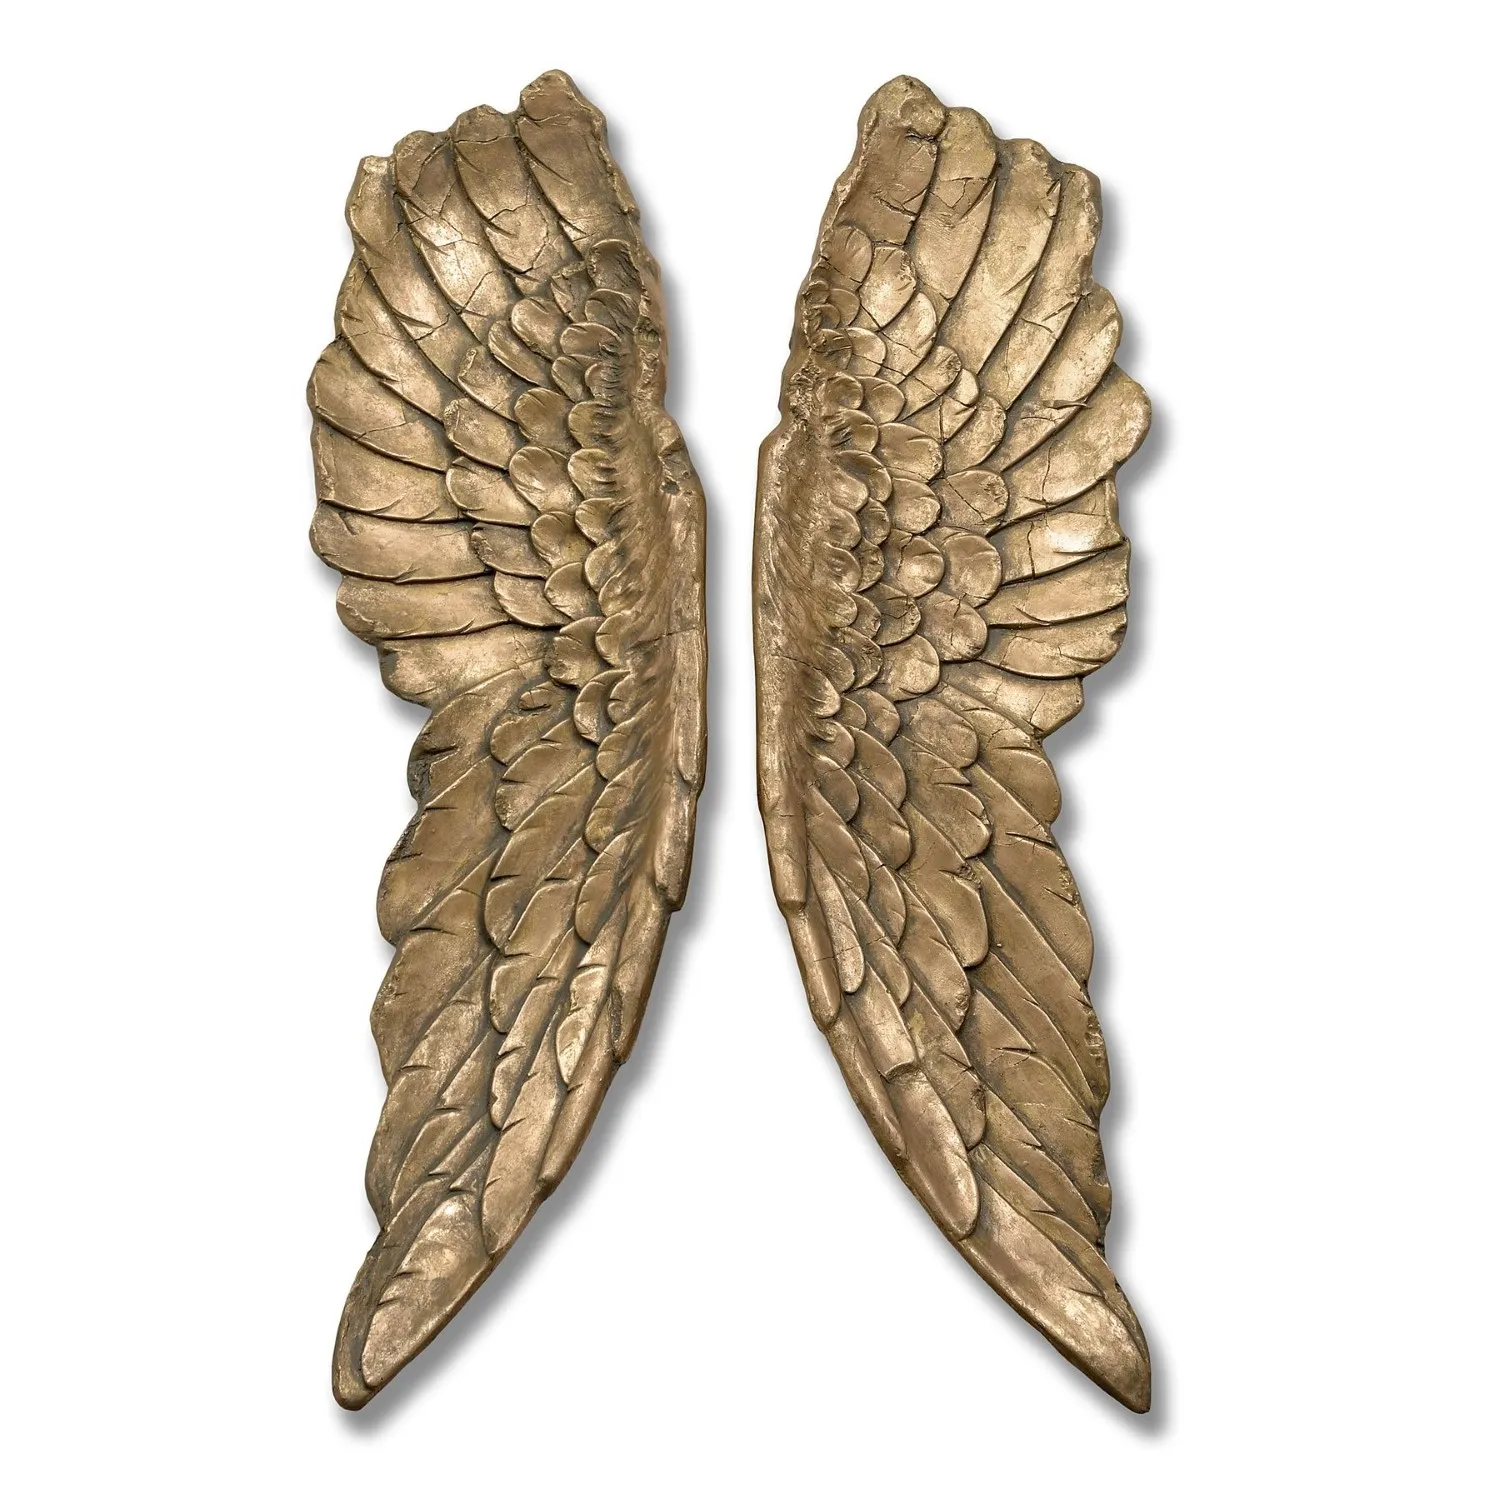 Pair of Antique Gold Large Angel Wings Wall Hanging Decoration 104x30x8cm